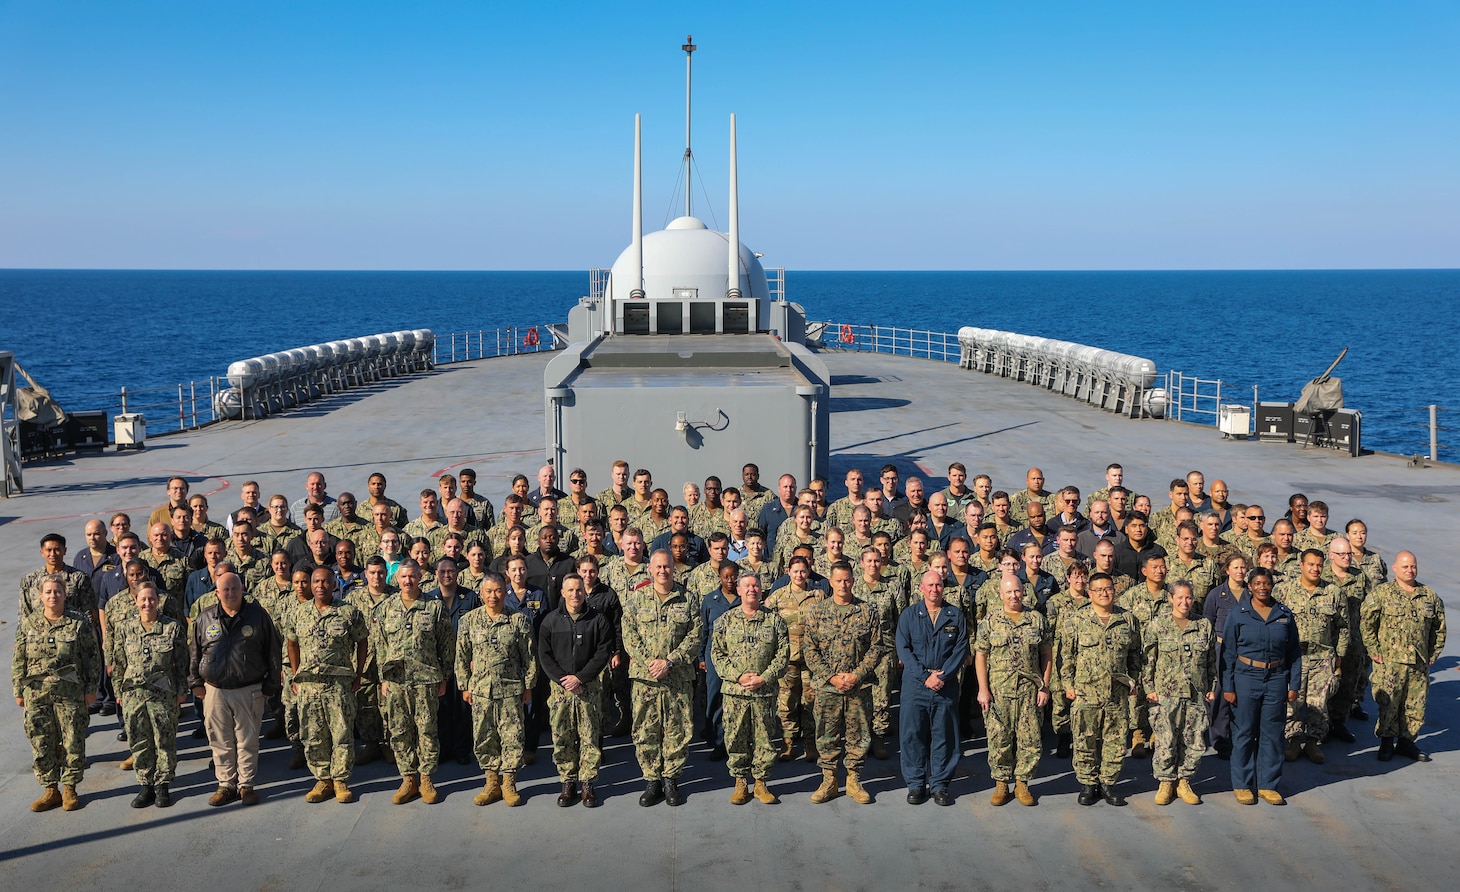 230810-N-JM579-1048 MEDITERREAN SEA (August 10, 2023) U.S. 6th Fleet headquarters staff stand in formation for group photo aboard the Blue Ridge-class command and control ship USS Mount Whitney (LCC 20), Aug. 10, 2023. Mount Whitney is participating in Large Scale Exercise 2023 from Aug. 9-18, which is a live, virtual, and constructive, globally-integrated exercise designed to refine the synchronization of maritime operations across six maritime component commands, seven numbered fleets, and 22 time zones. (U.S. Navy photo by Mass Communication Specialist Seaman Joseph Macklin)